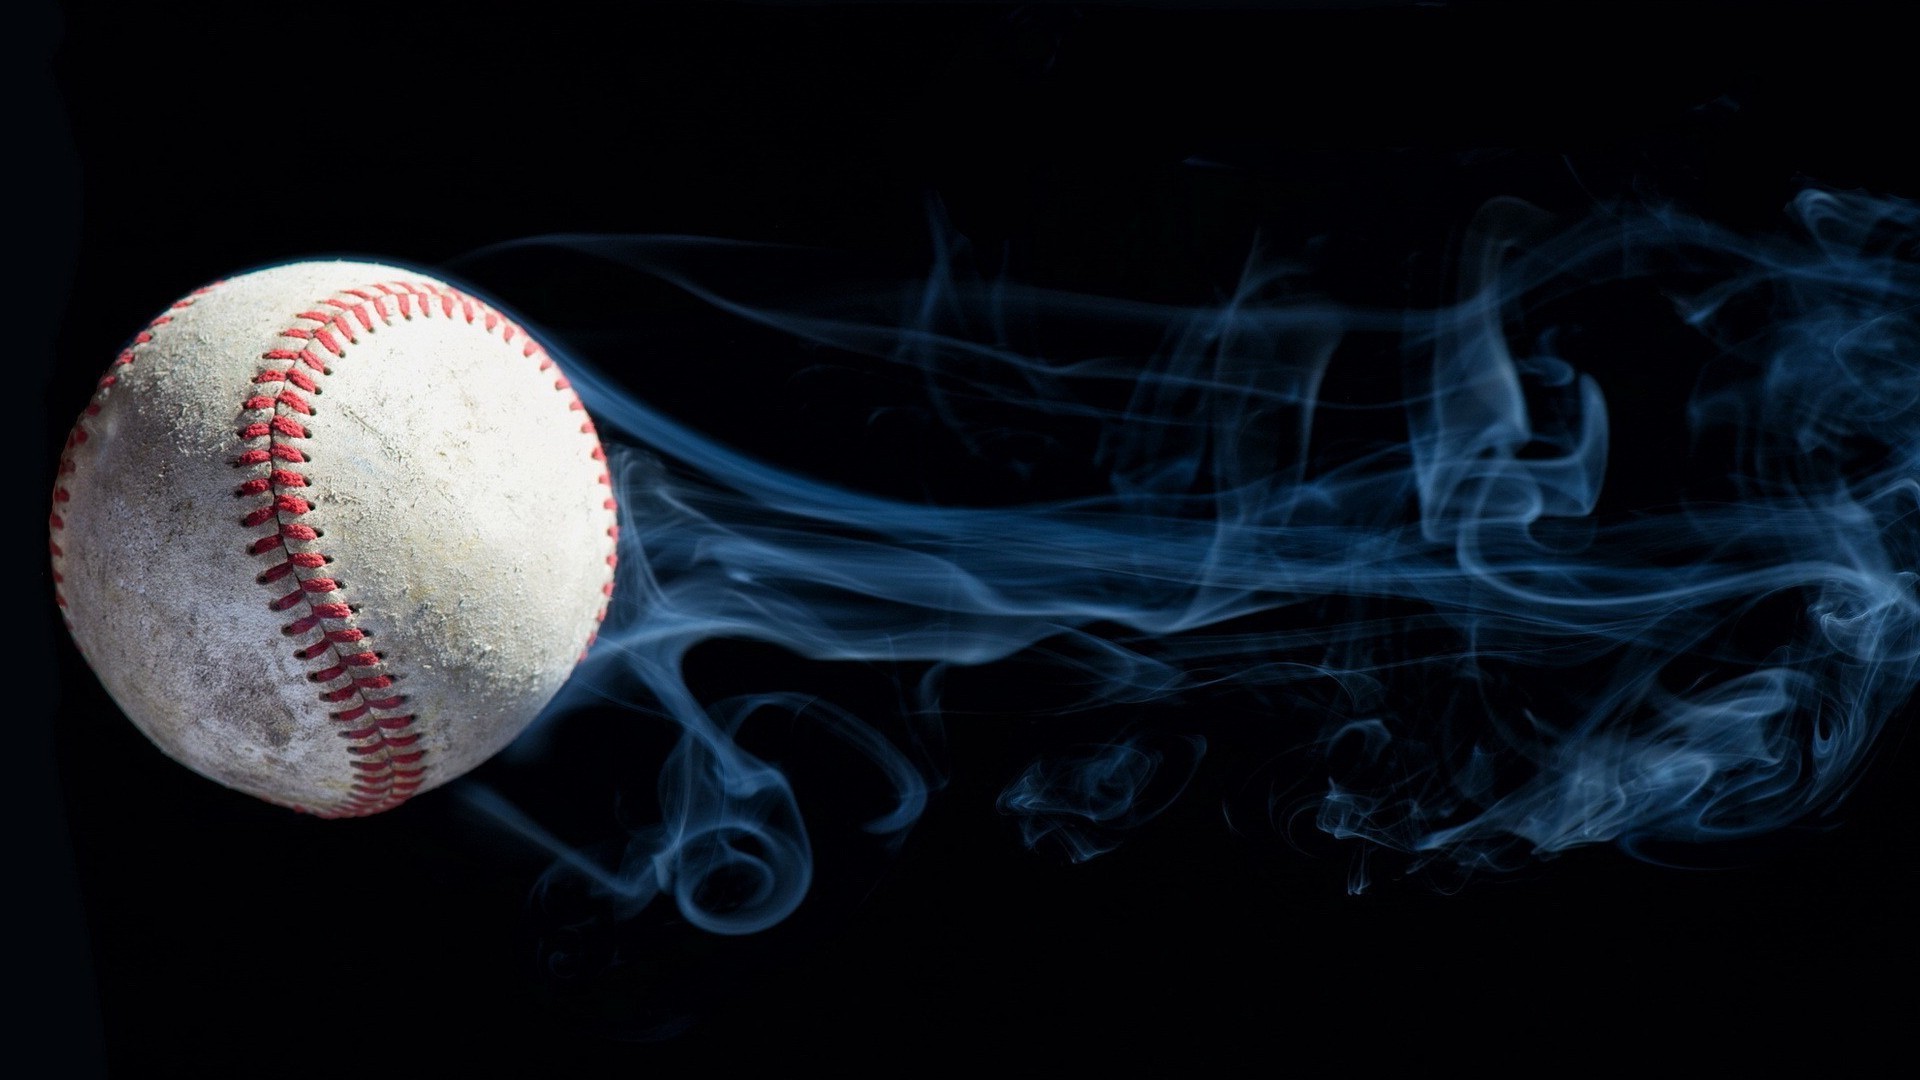 HD Backgrounds Cool Baseball With high-resolution 1920X1080 pixel. You can use this wallpaper for Mac Desktop Wallpaper, Laptop Screensavers, Android Wallpapers, Tablet or iPhone Home Screen and another mobile phone device